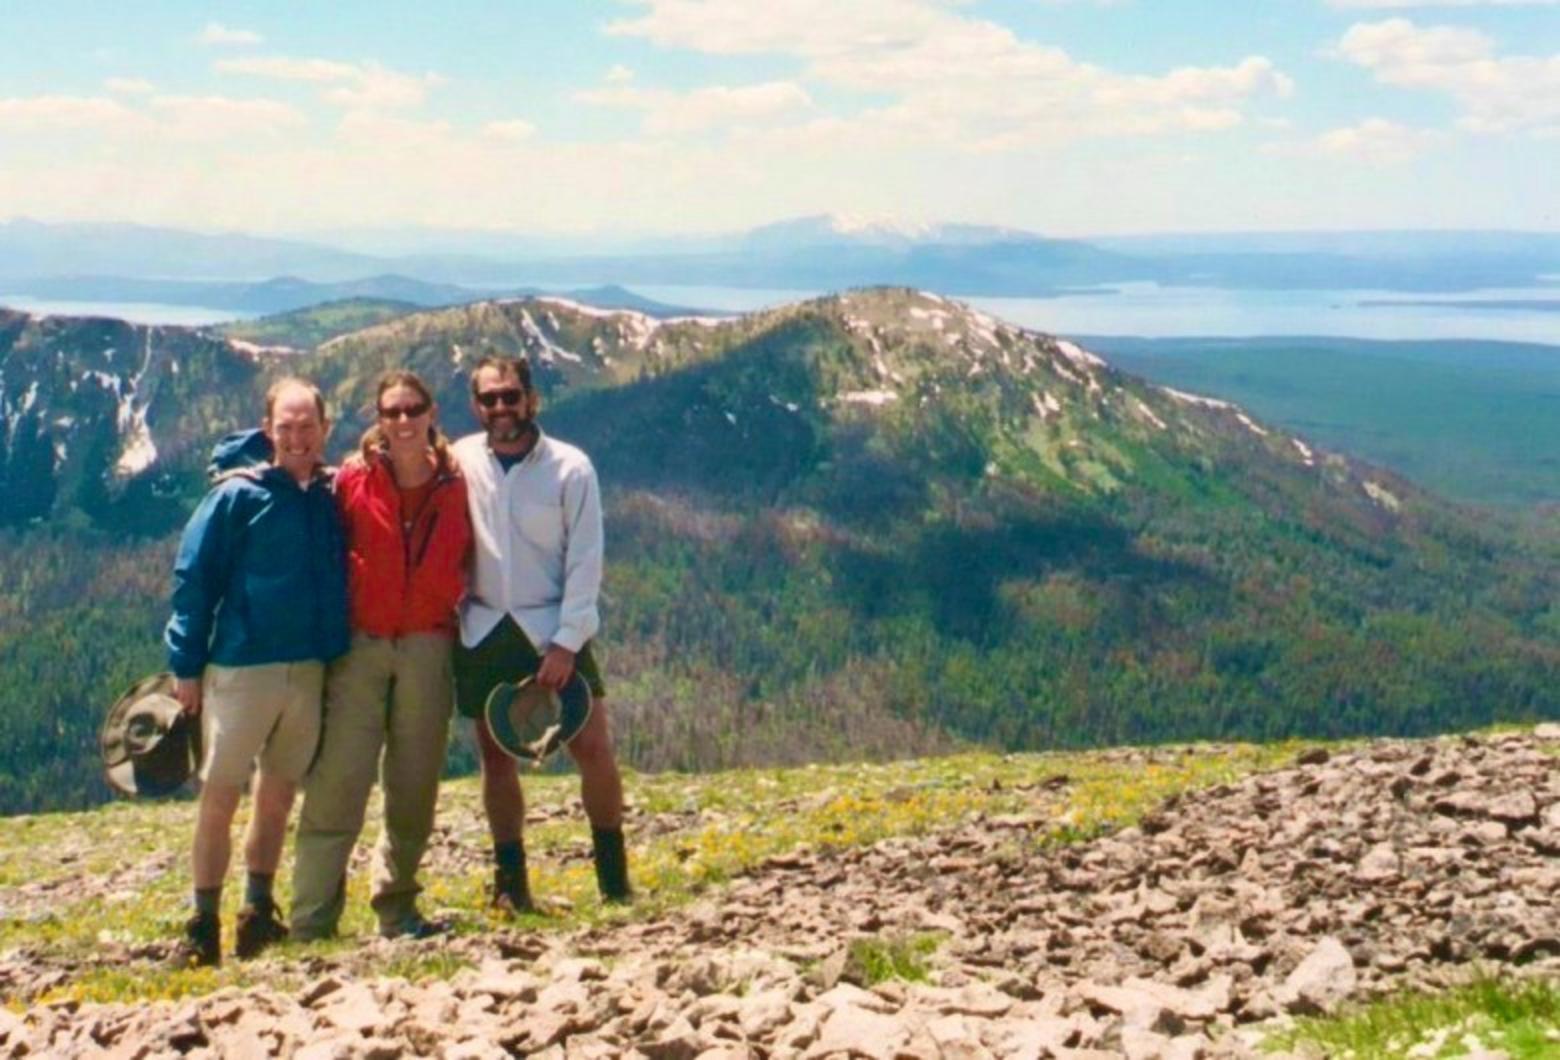 Yochim and family in healthier times on Avalanche Peak with Yellowstone Lake in the distance below. Photo courtesy Brian and Jill Yochim